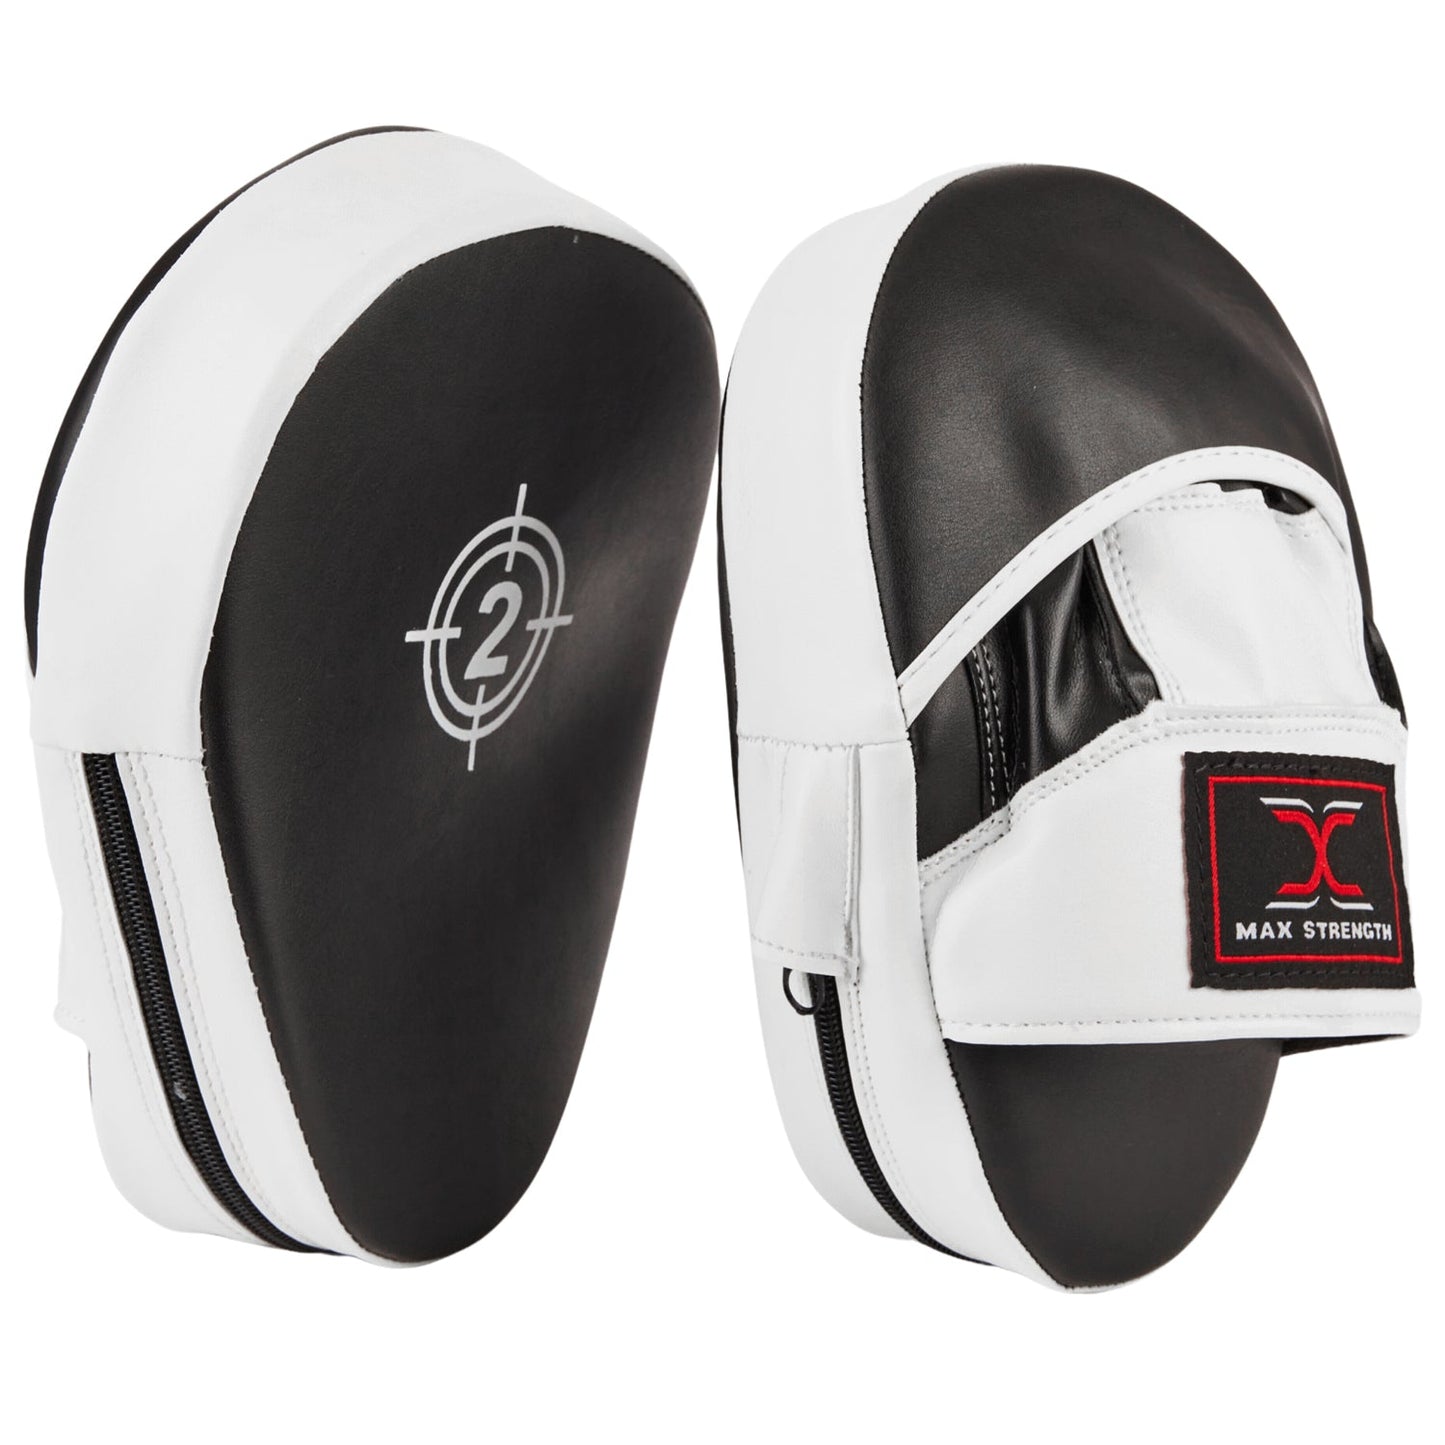 X MAXSTRENGTH Boxing Focus Pads Mitts Curved Punching Pad Black/White